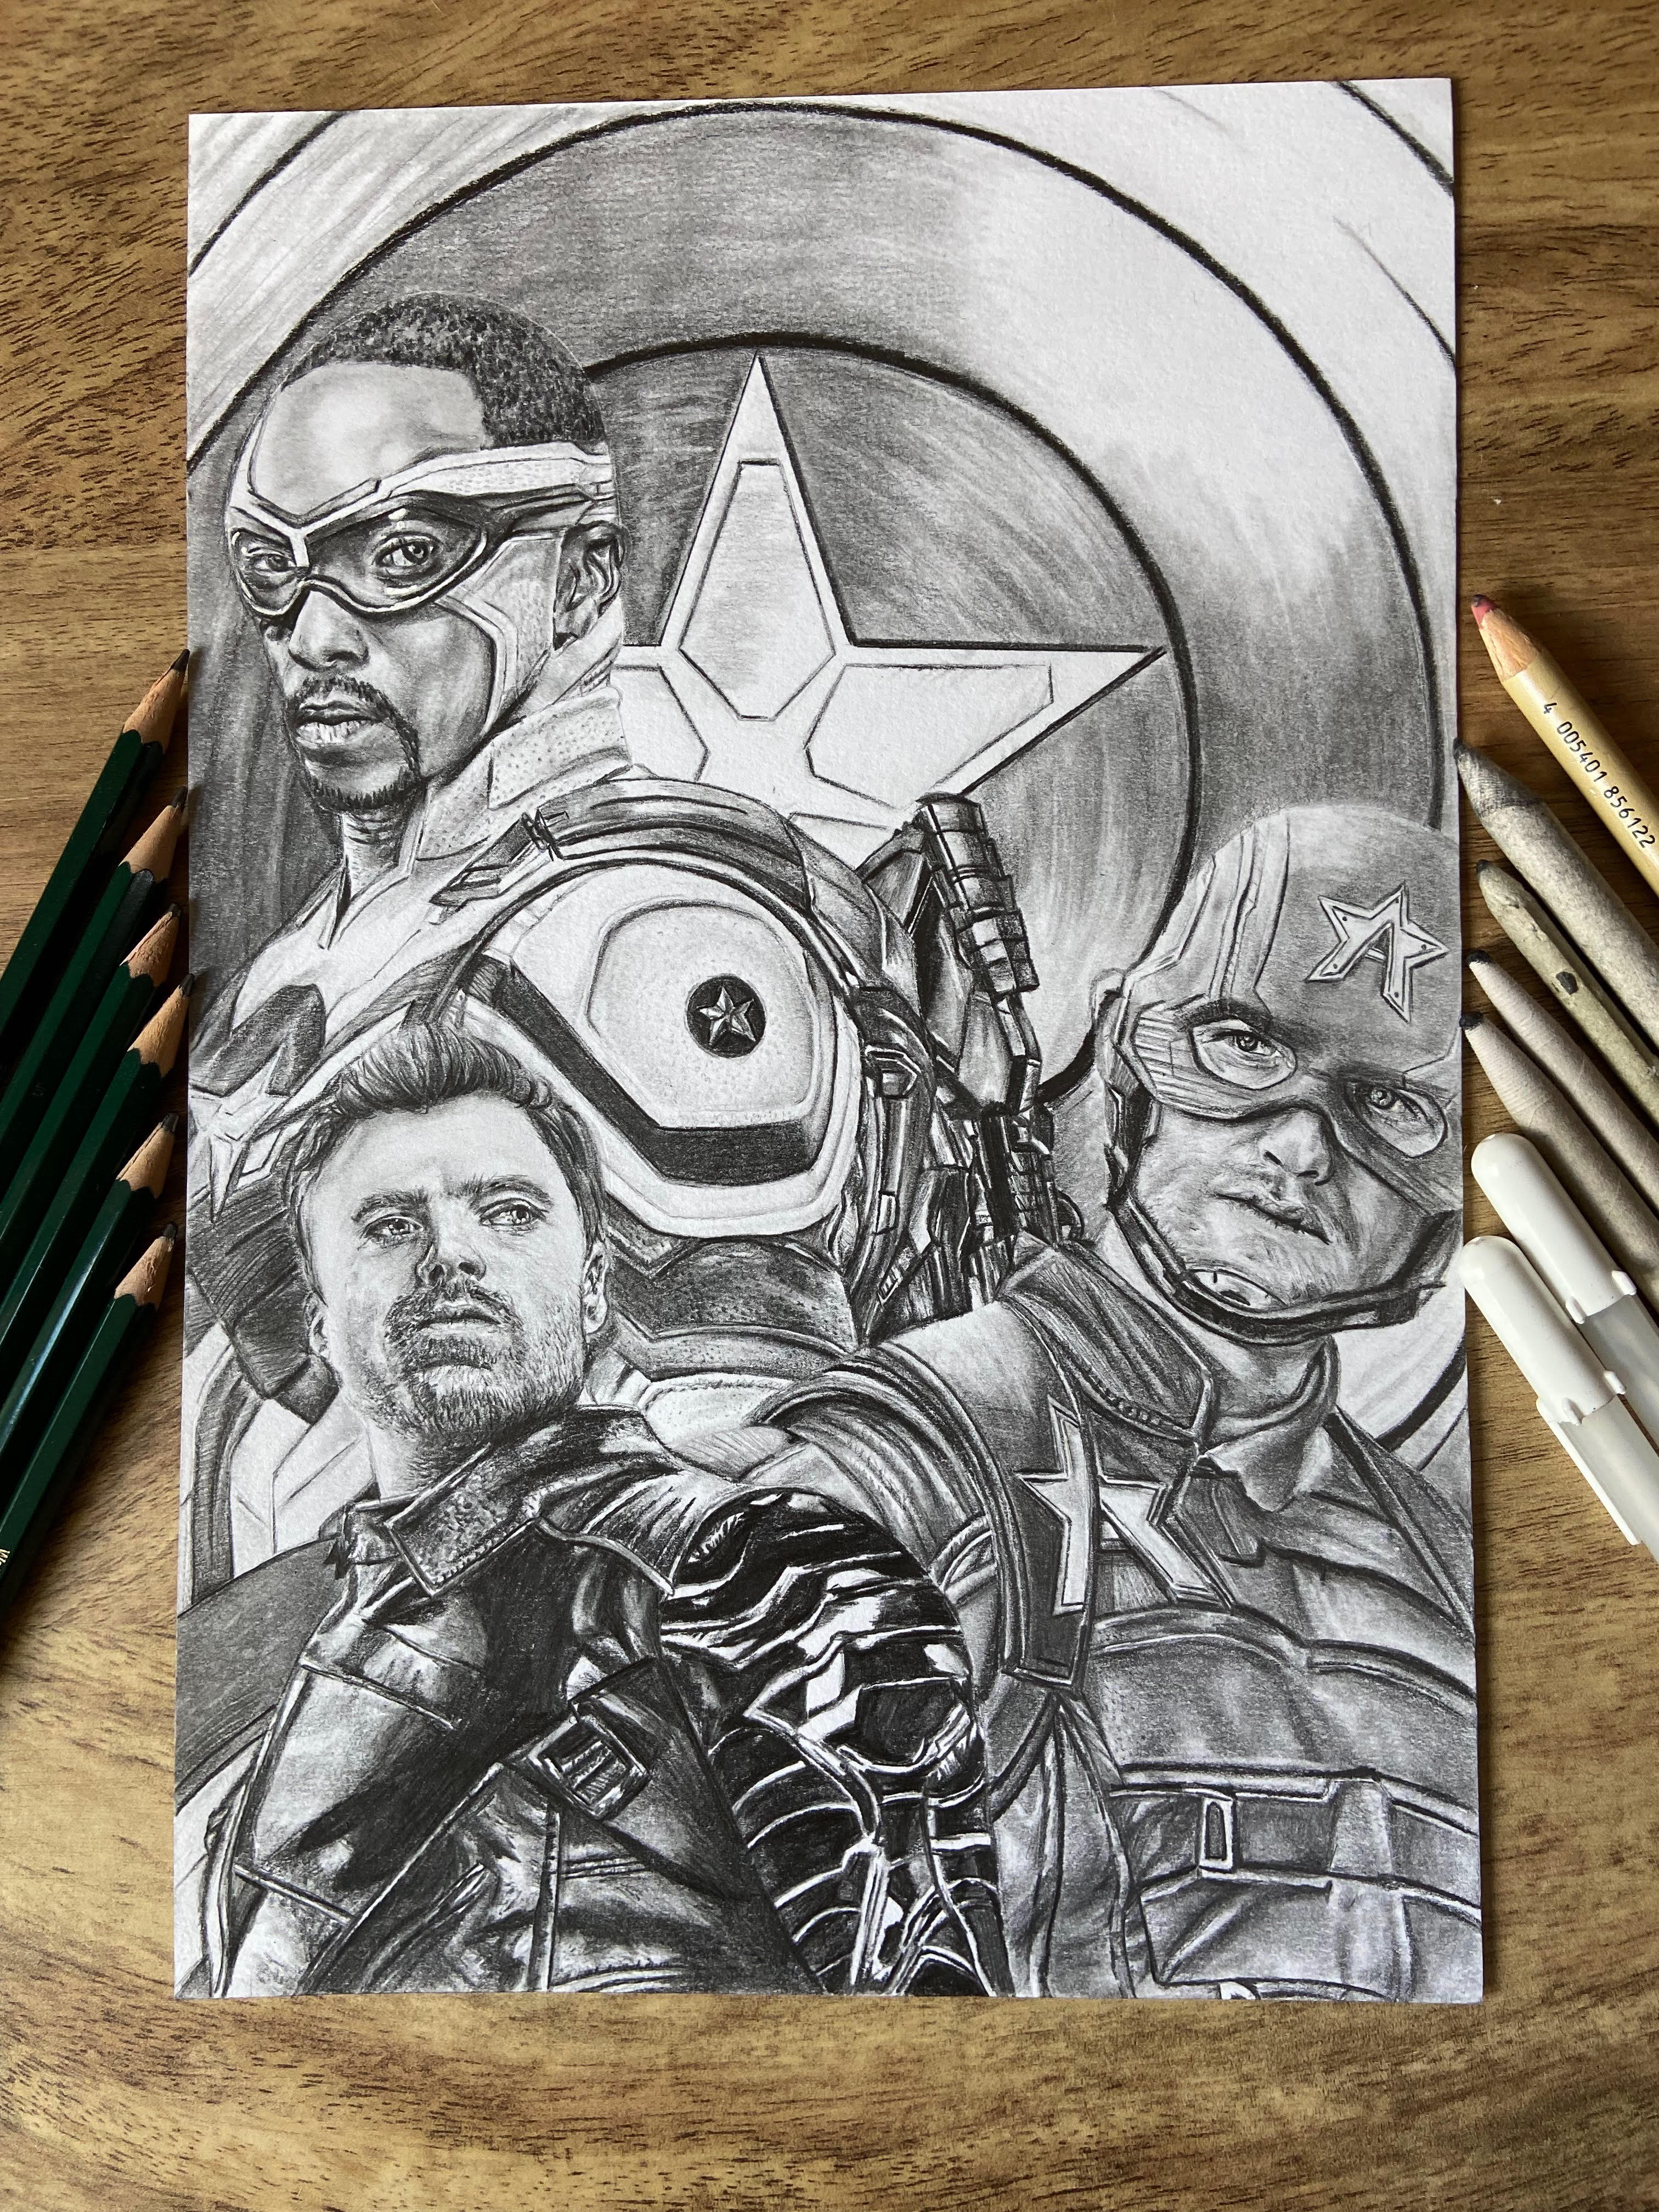 Pencil drawing of The Falcon, Bucky, and U.S agent from the Marvel TV show 'The Falcon and the Winter Soldier'